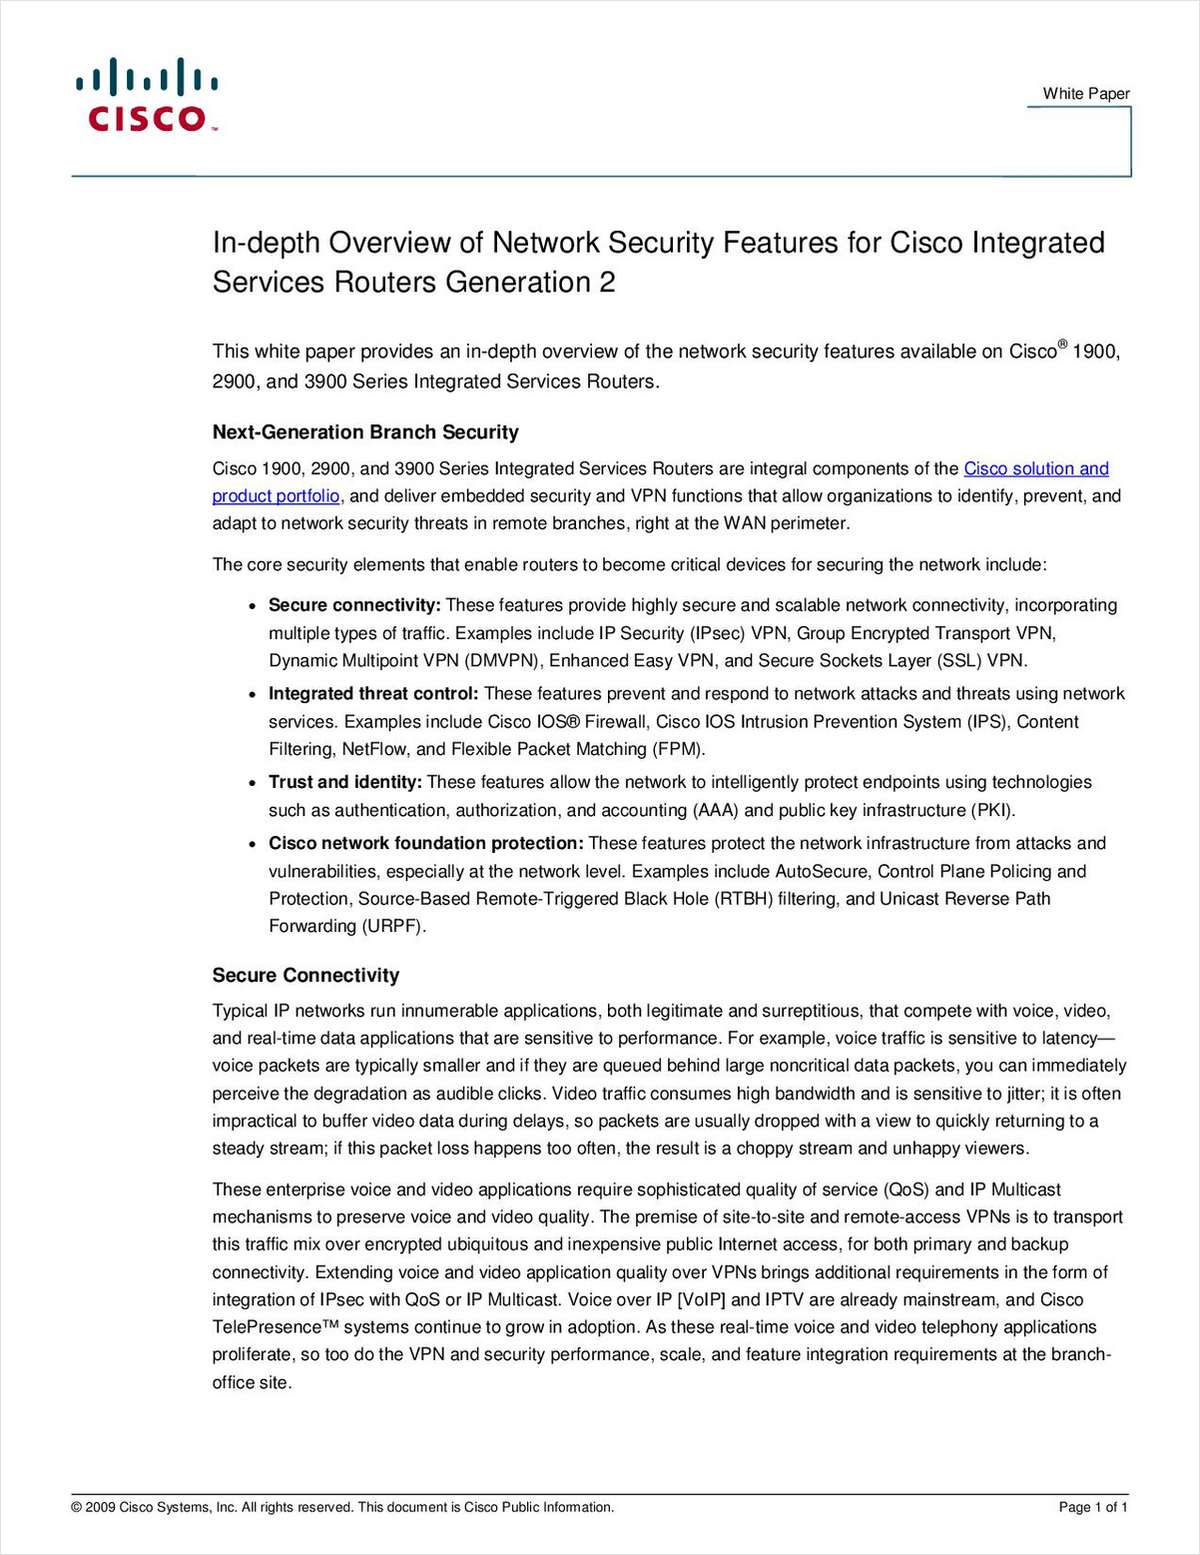 Network Security Features for Cisco Integrated Services Routers